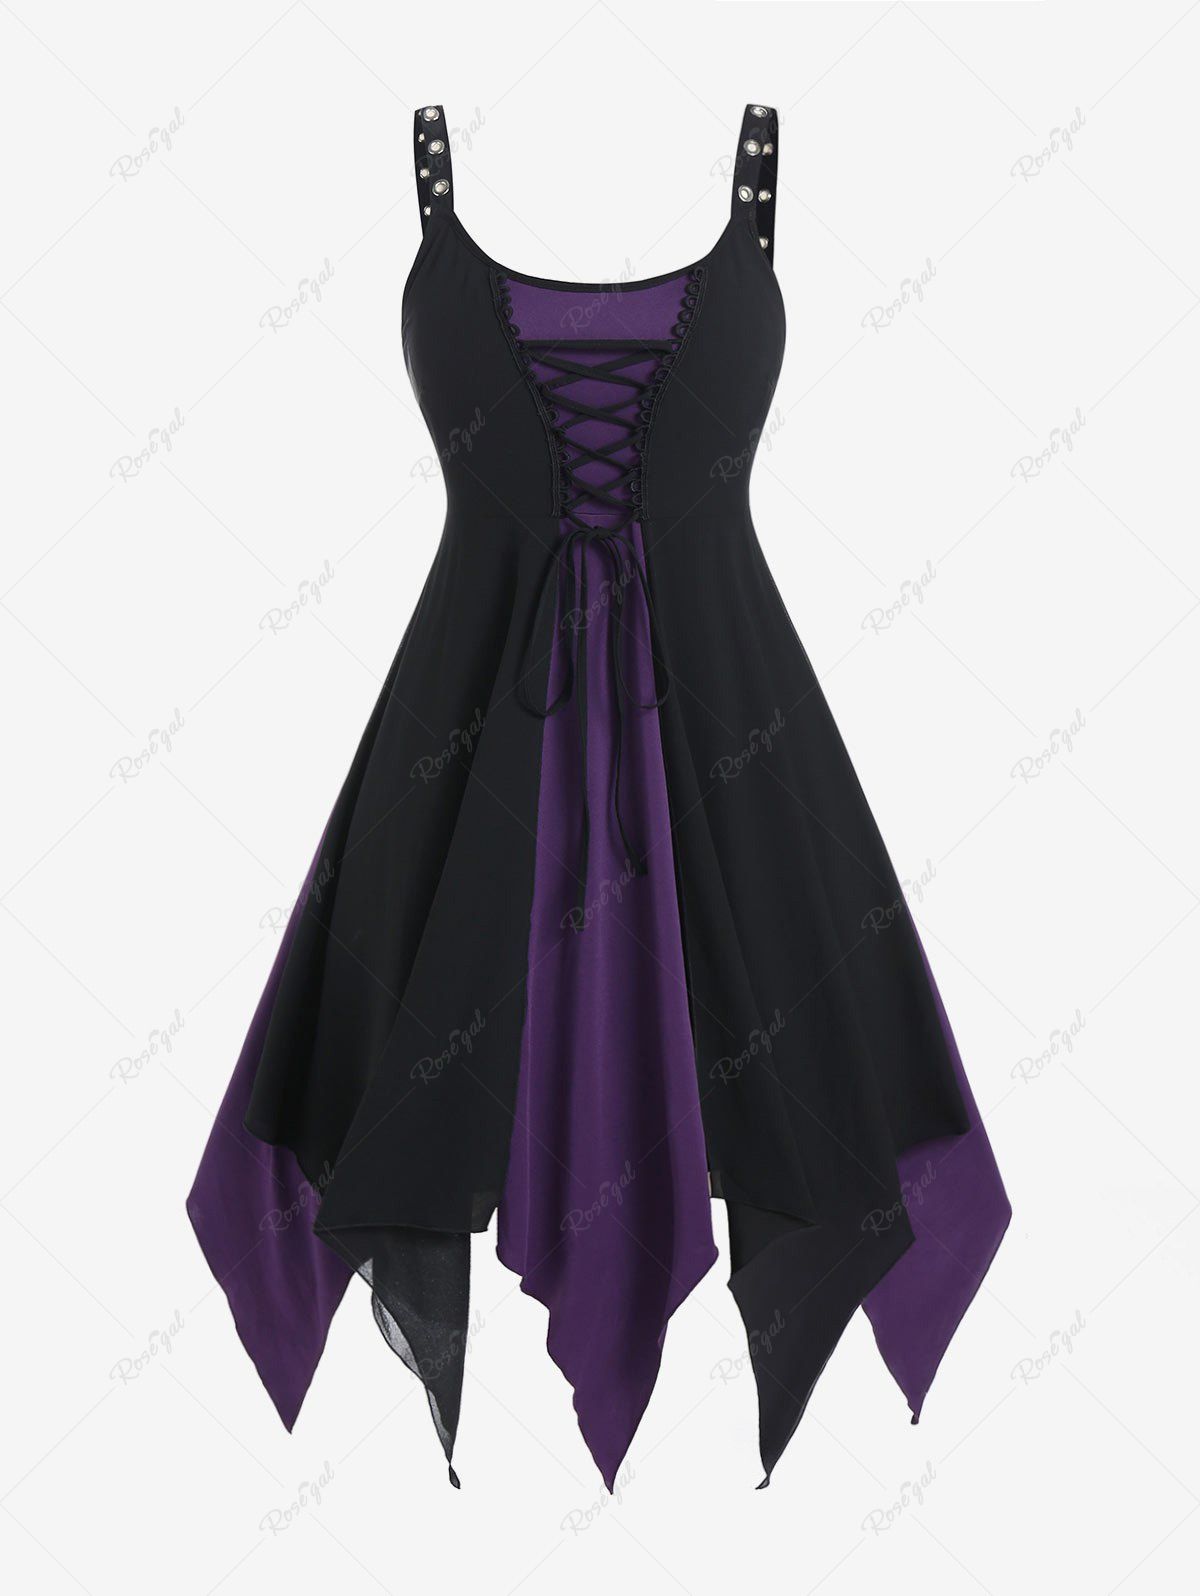 Discount Plus Size Gothic Lace Up Grommet Backless Sleeveless Handkerchief Midi Dress  